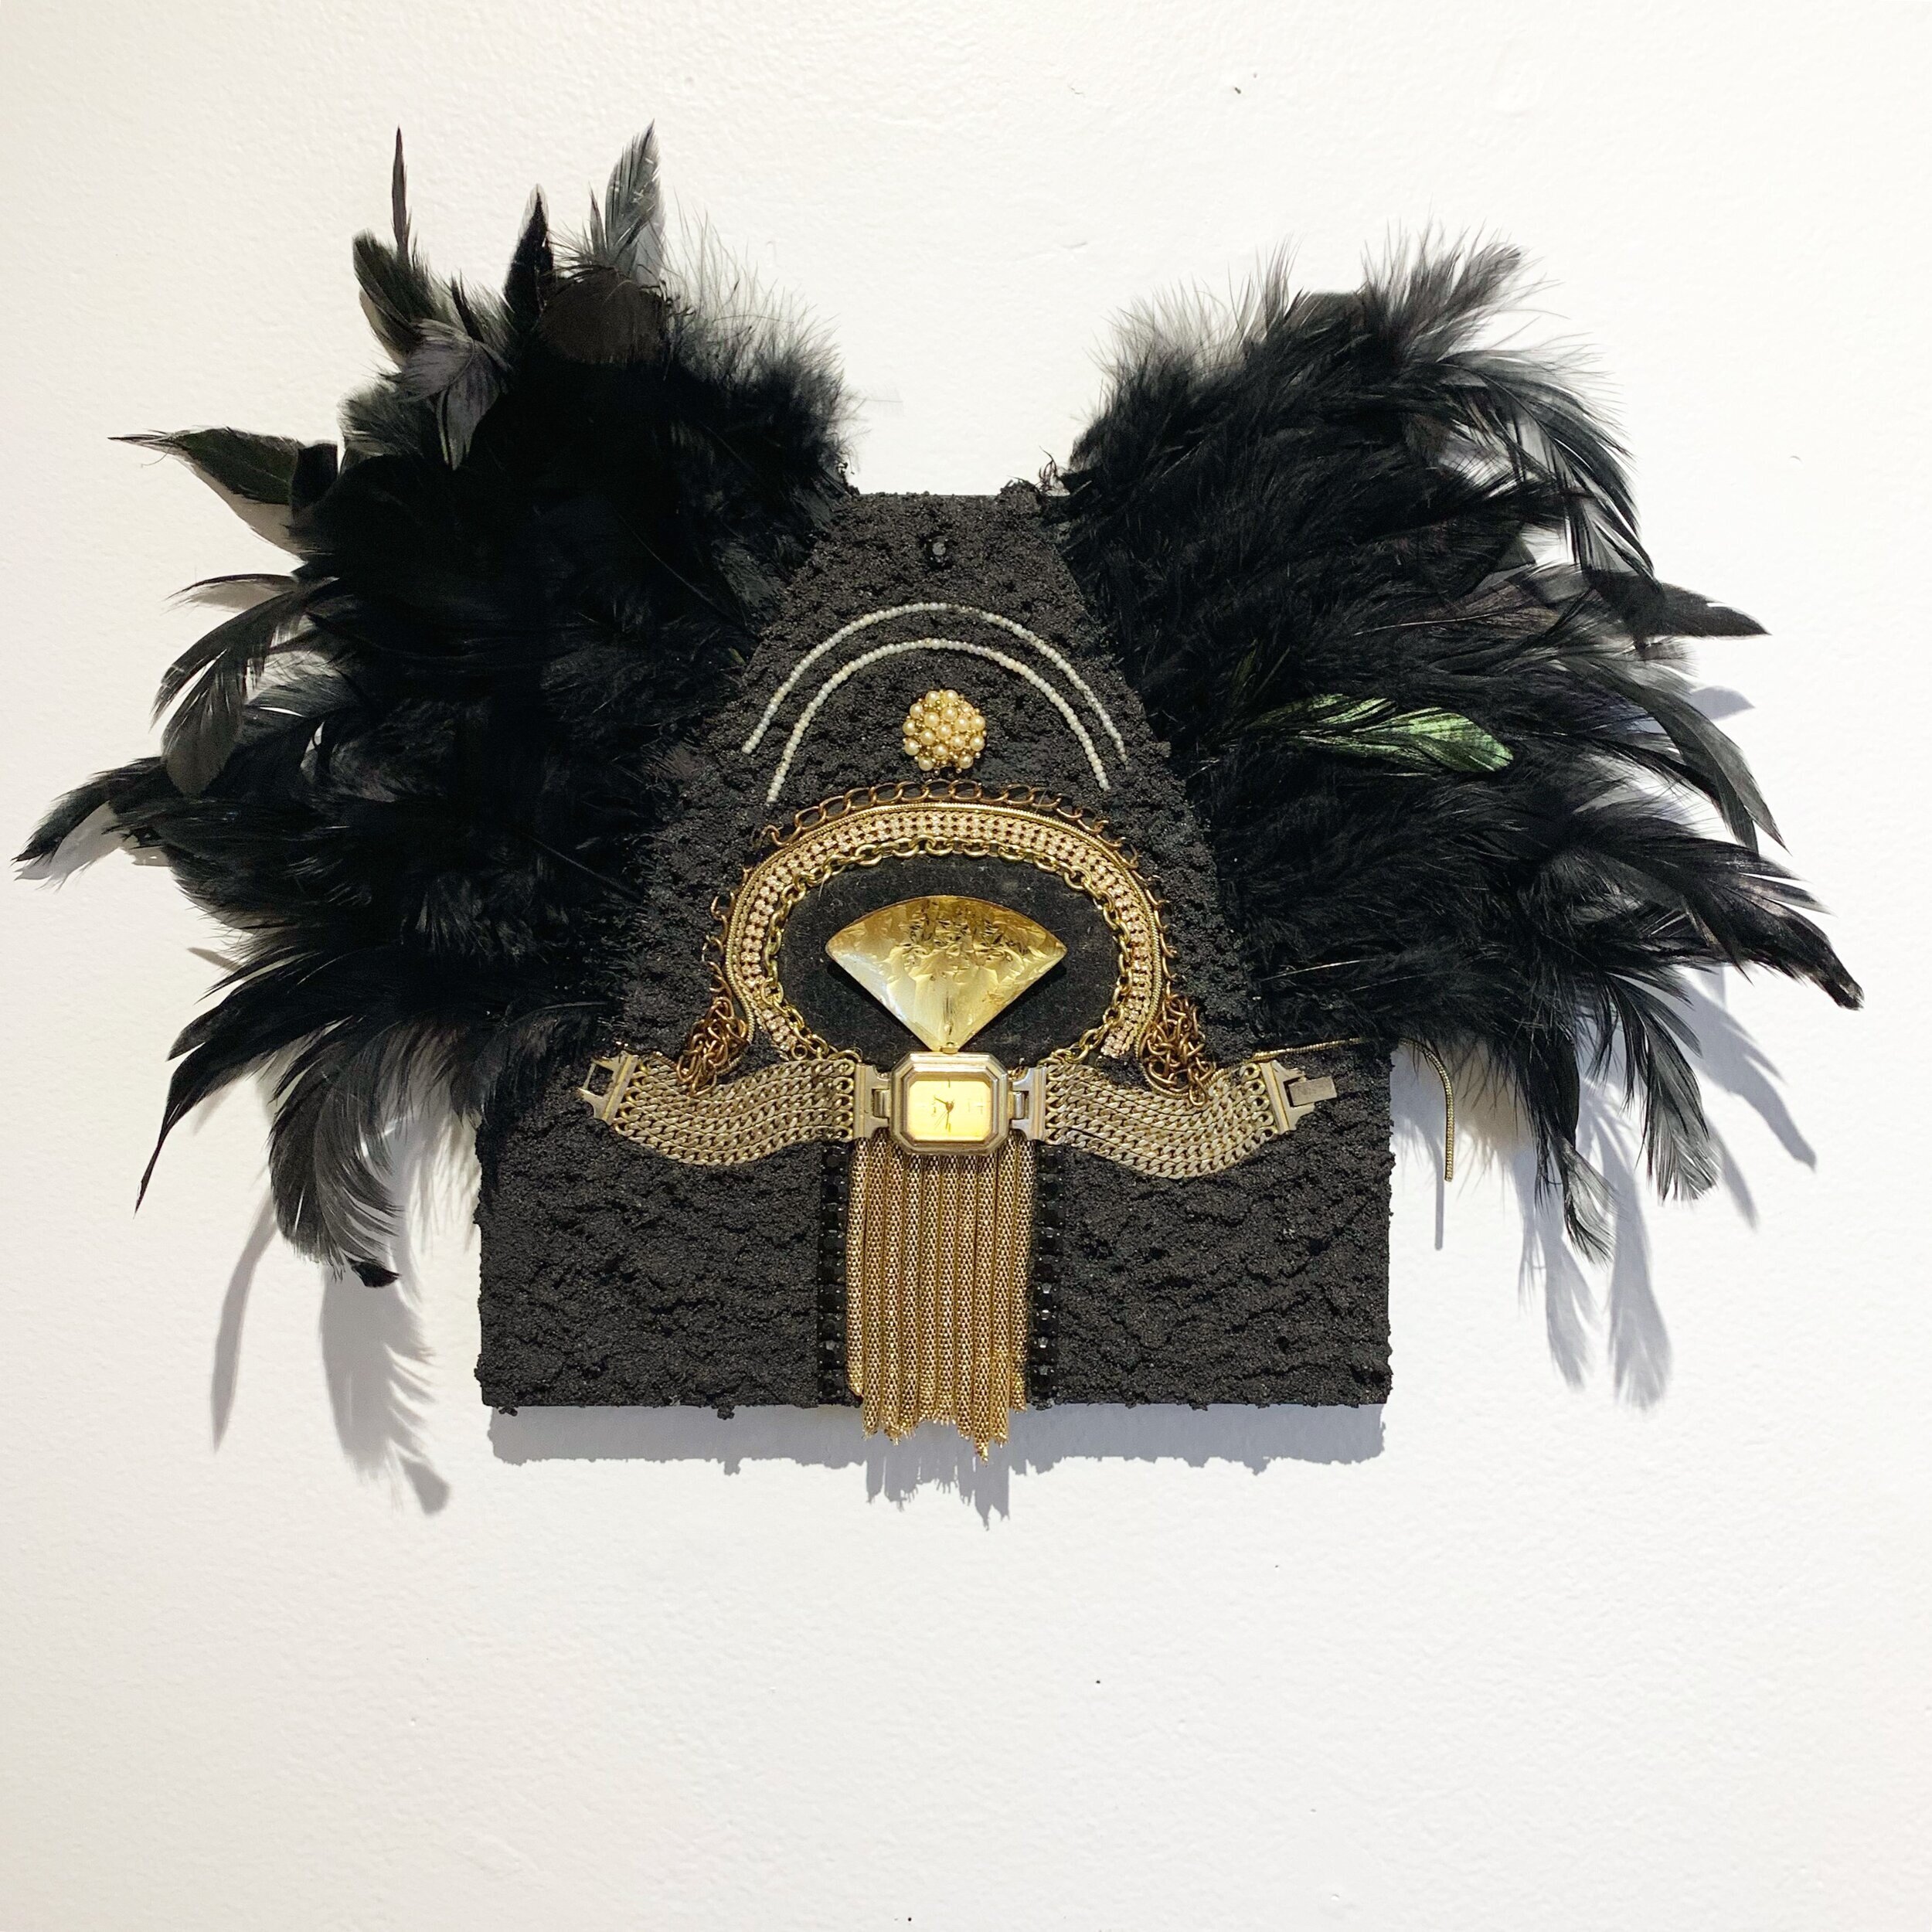   Far Feathered,  2020, costume jewelry, wrist watch, faux pearls, faux feathers, and pumice medium on panel, 8x8” 